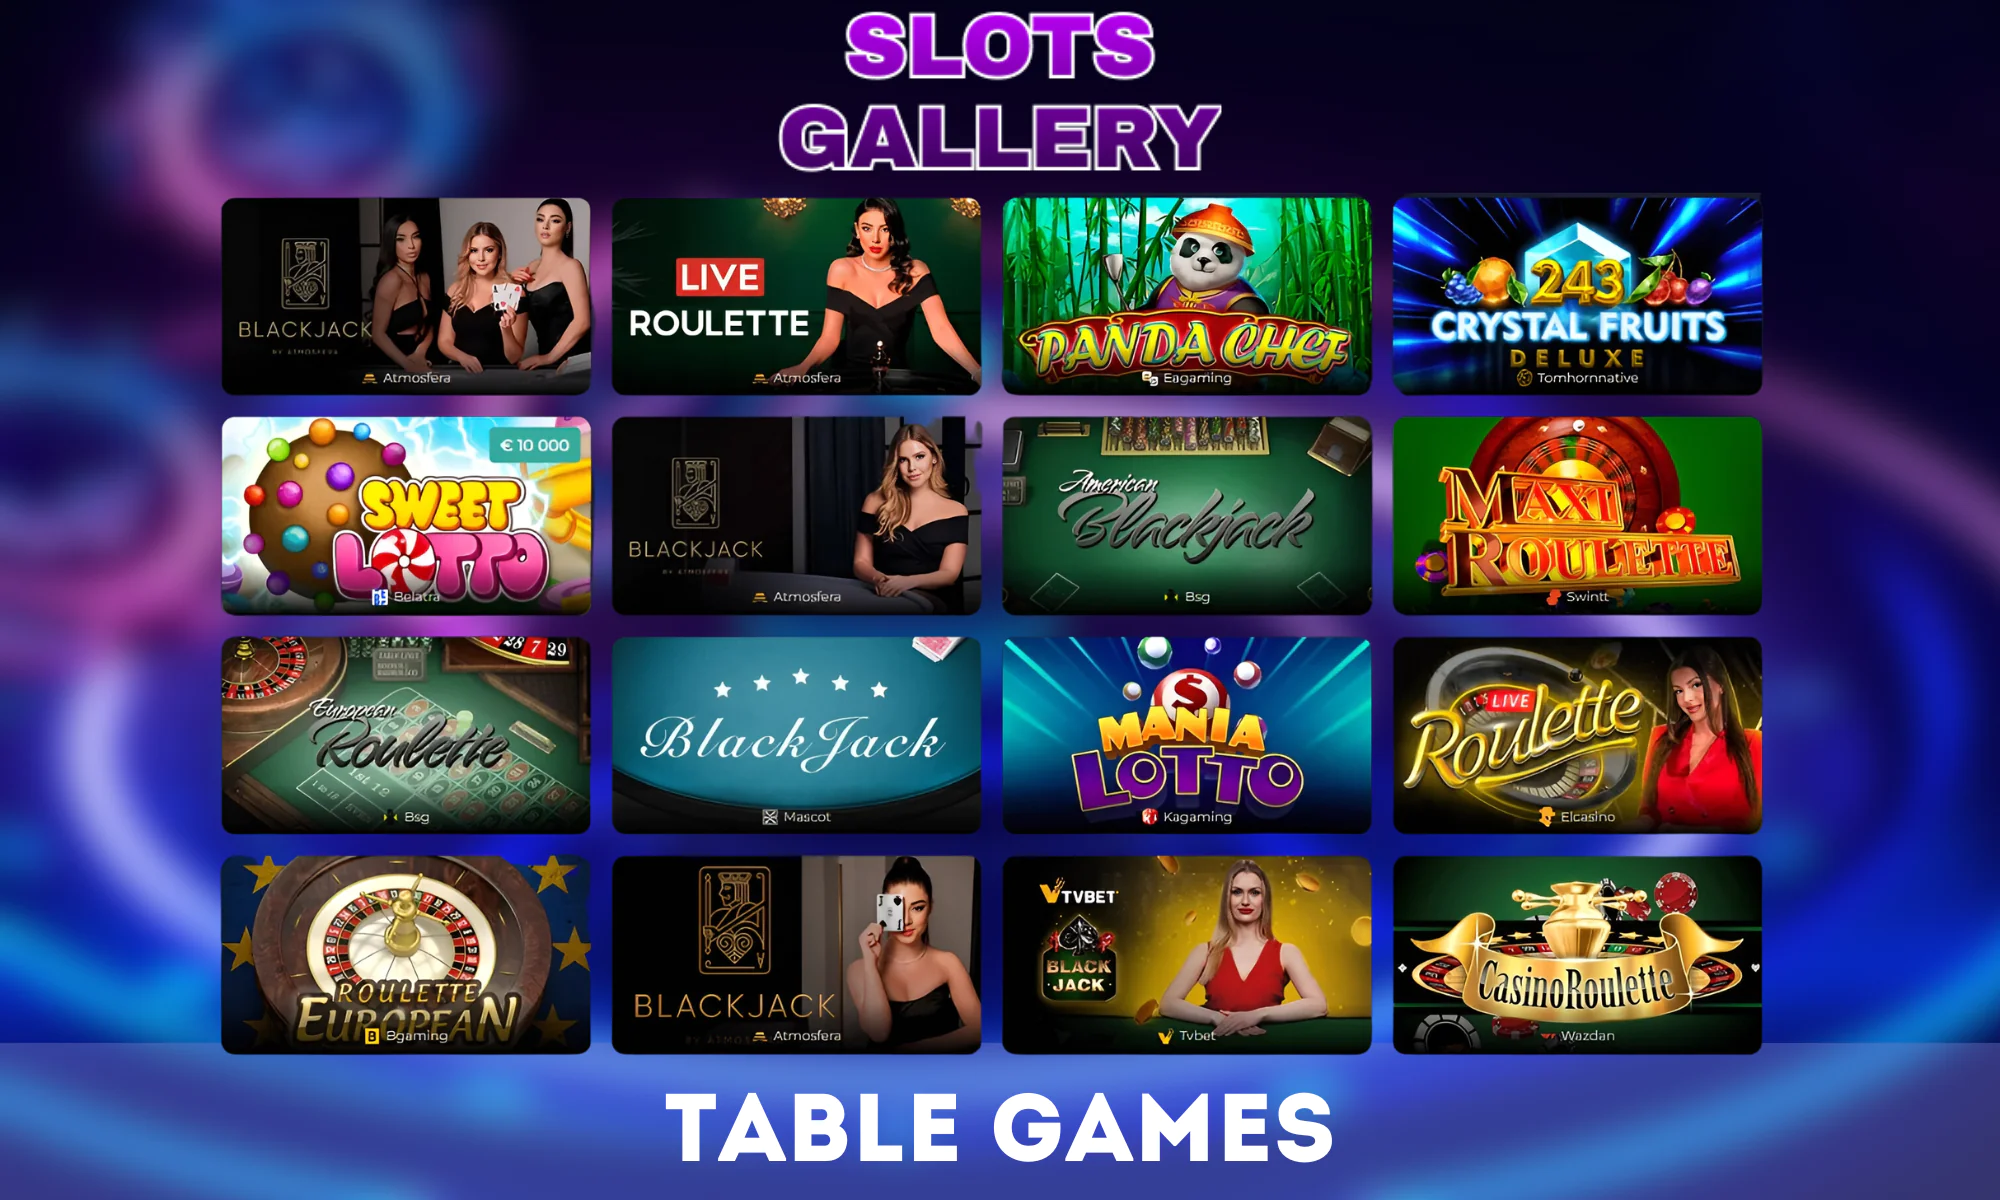 Available Table Games on the official website